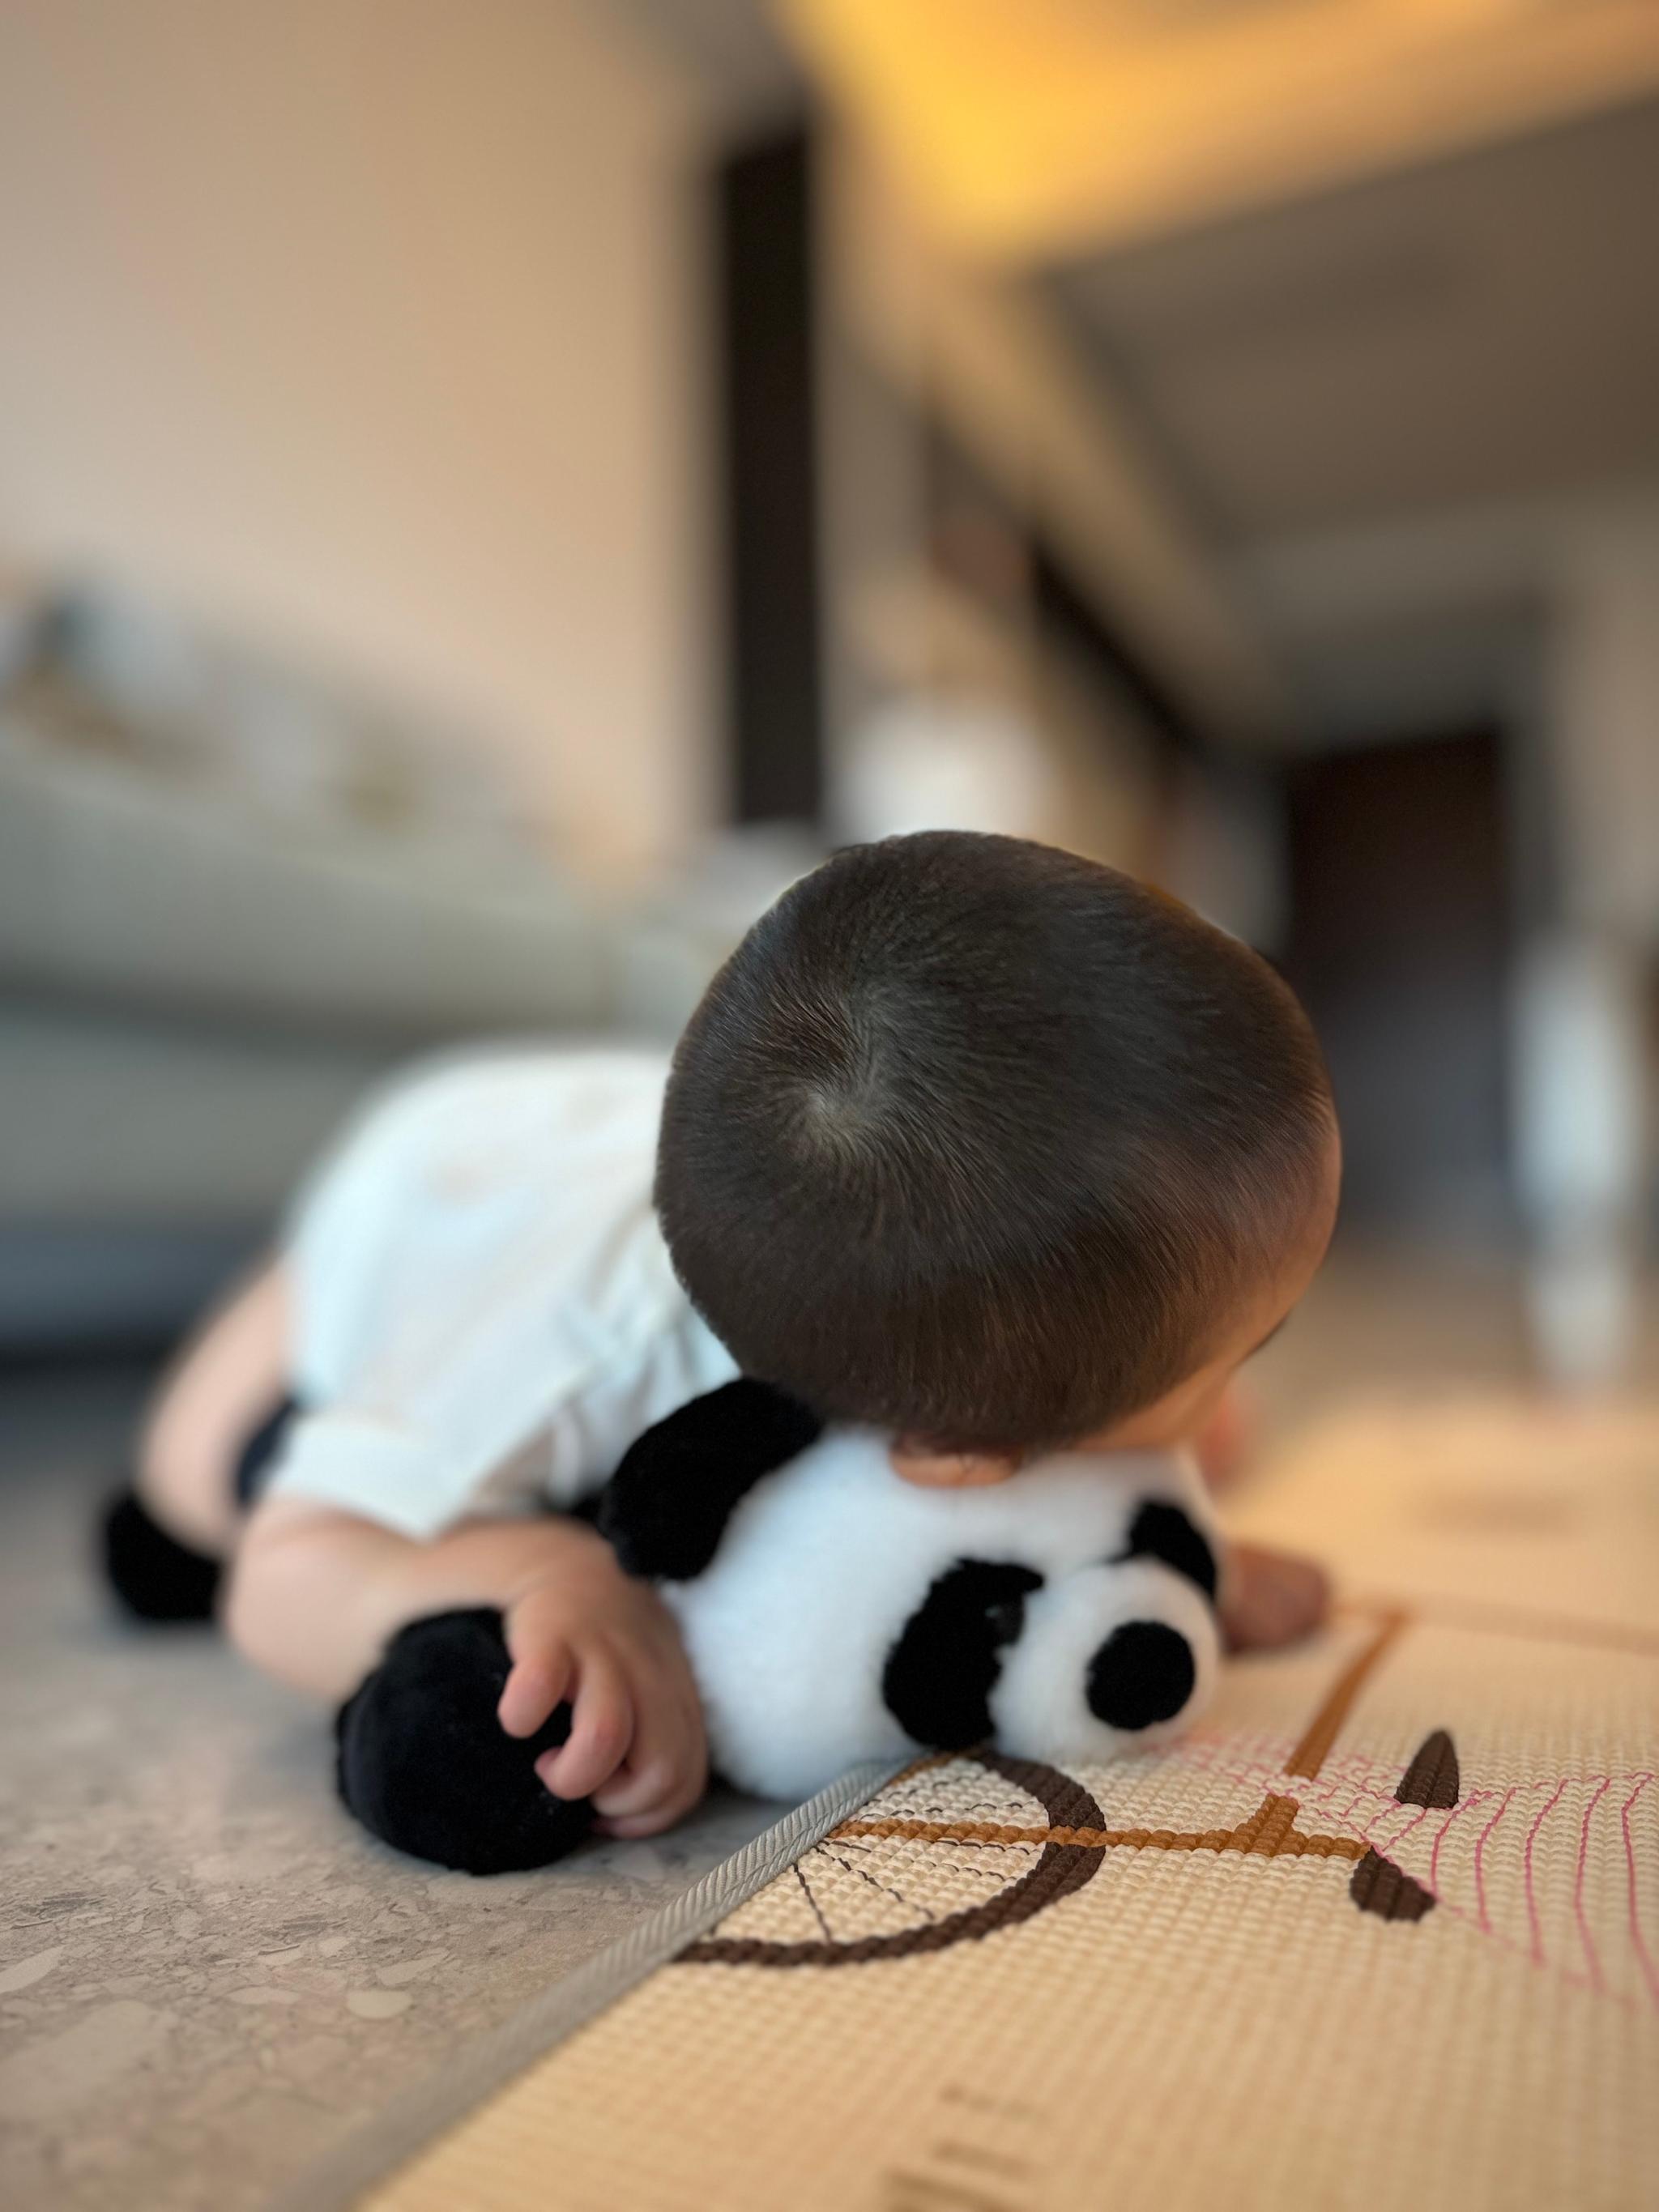 A child lying on the floor, resting their head on a stuffed panda toy, with a blurred background of a living room